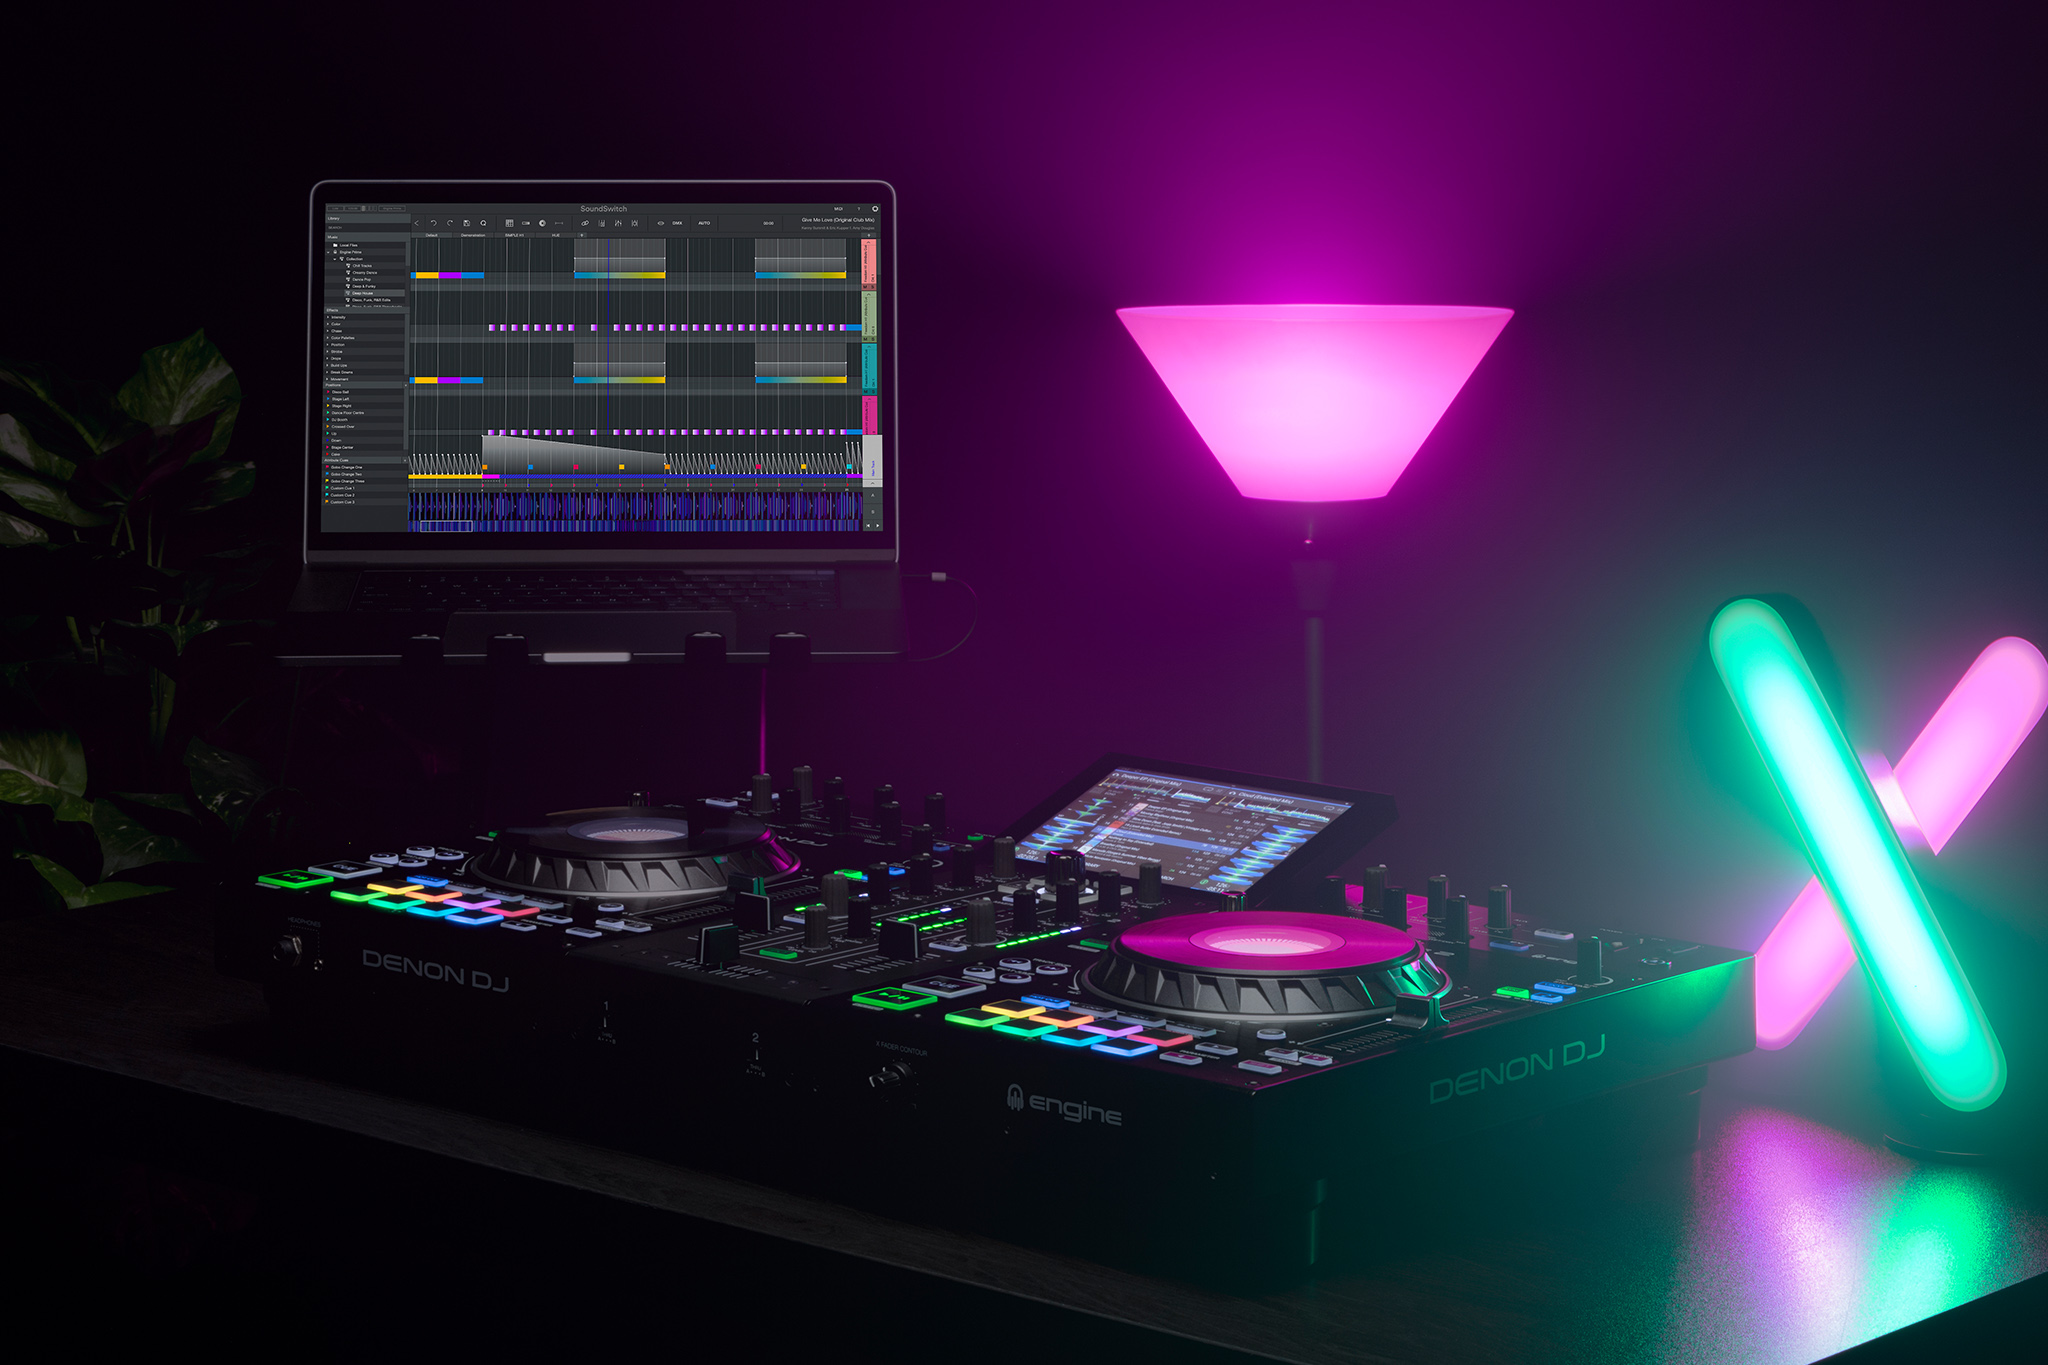 SoundSwitch Desktop DMX Lighting Control Software for DJs running on a laptop connected to the Denon DJ Prime 2 and Philips HUE Lighting